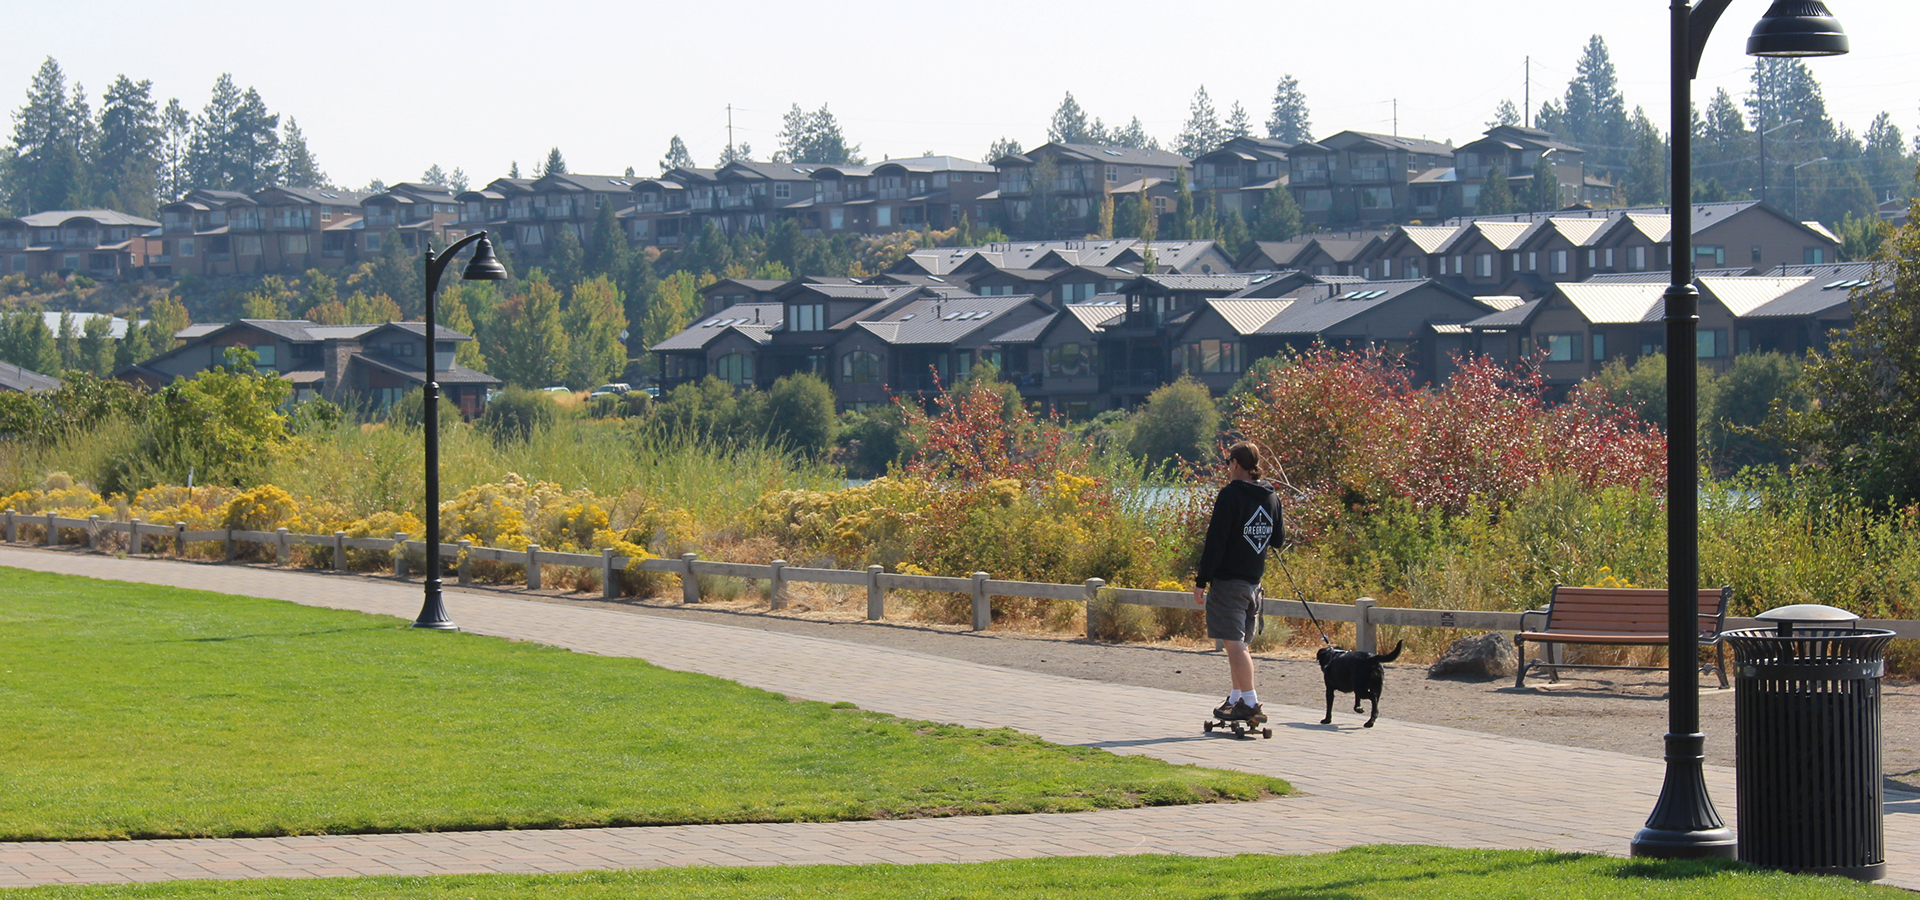 A man skateboarding with his dog at Riverbend Park.